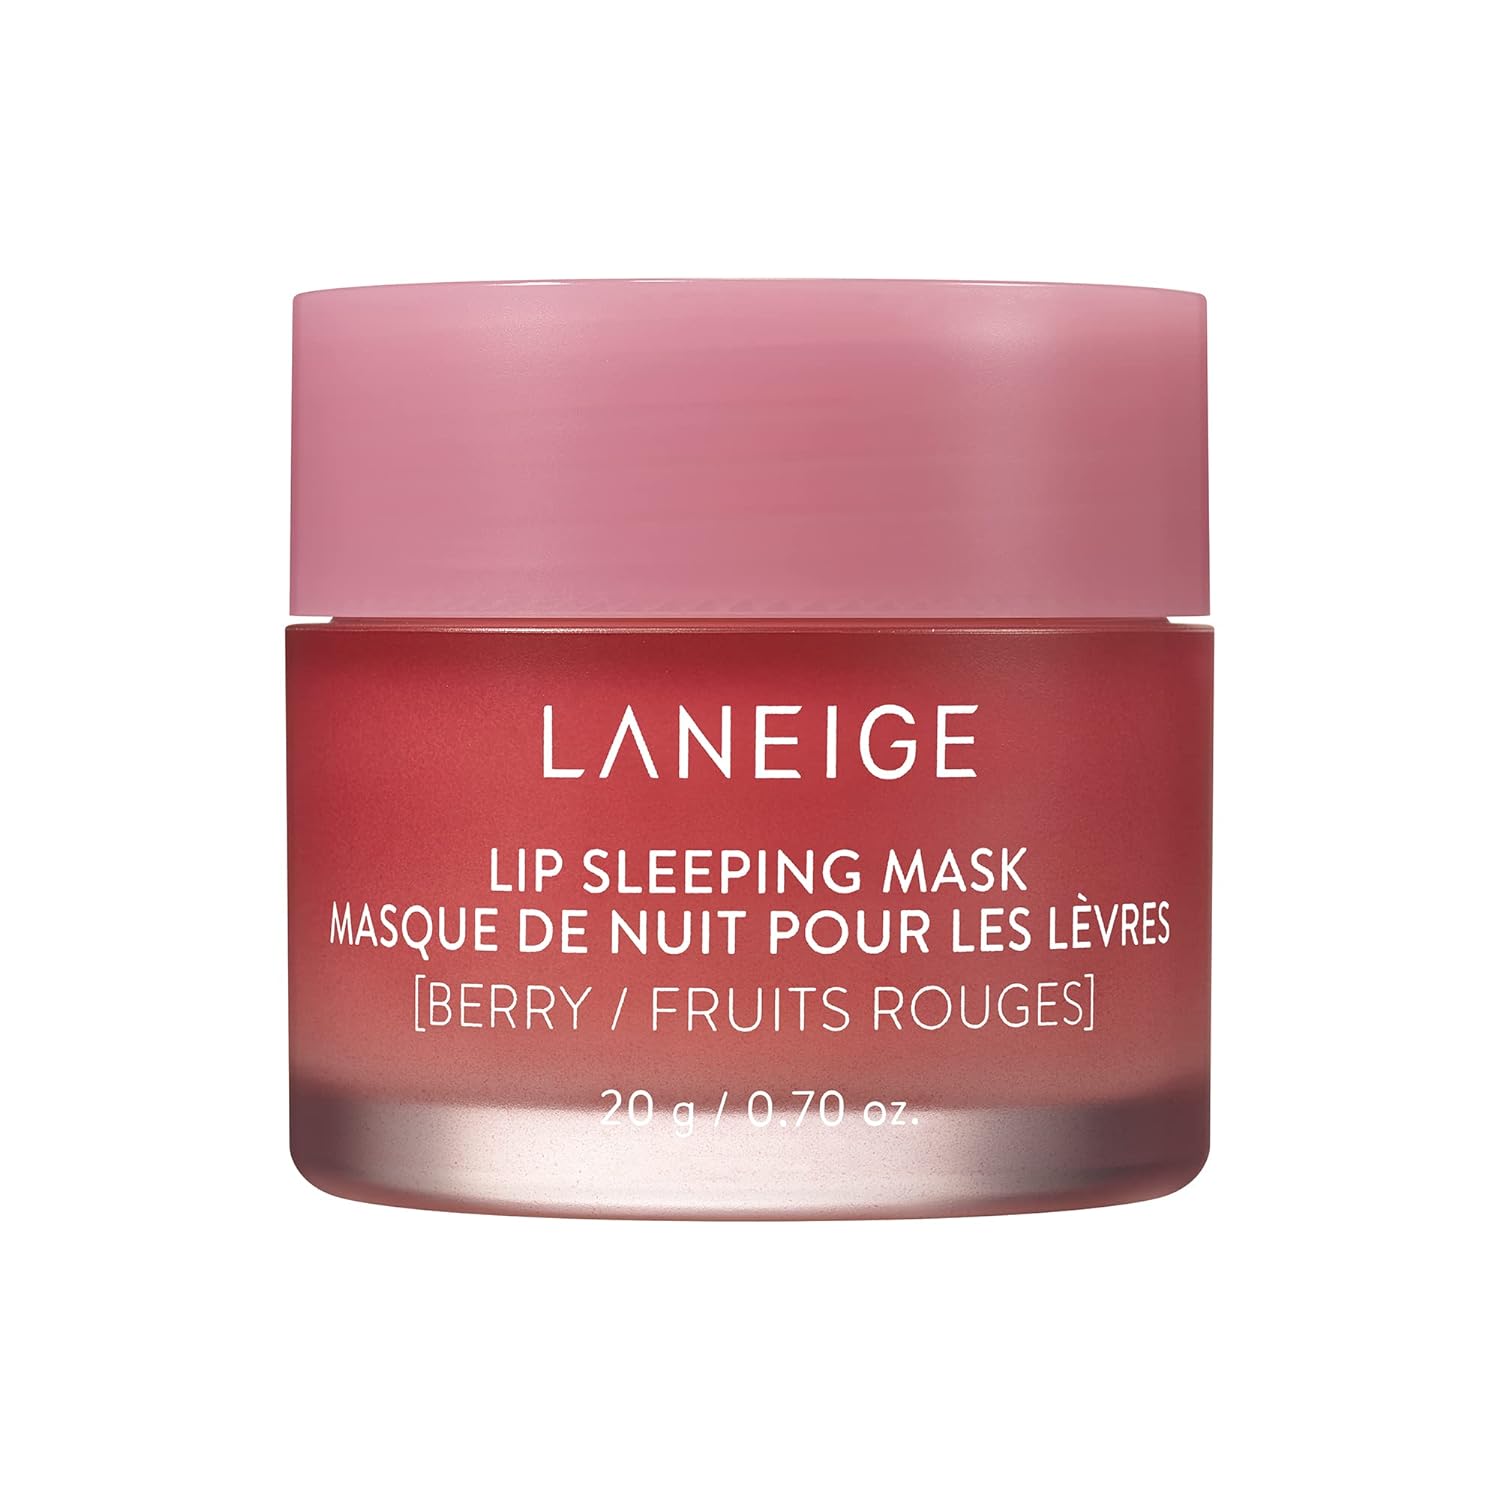 Laneige Lip Sleeping Mask: An Overnight Oasis for Nourished and Hydrated Lips